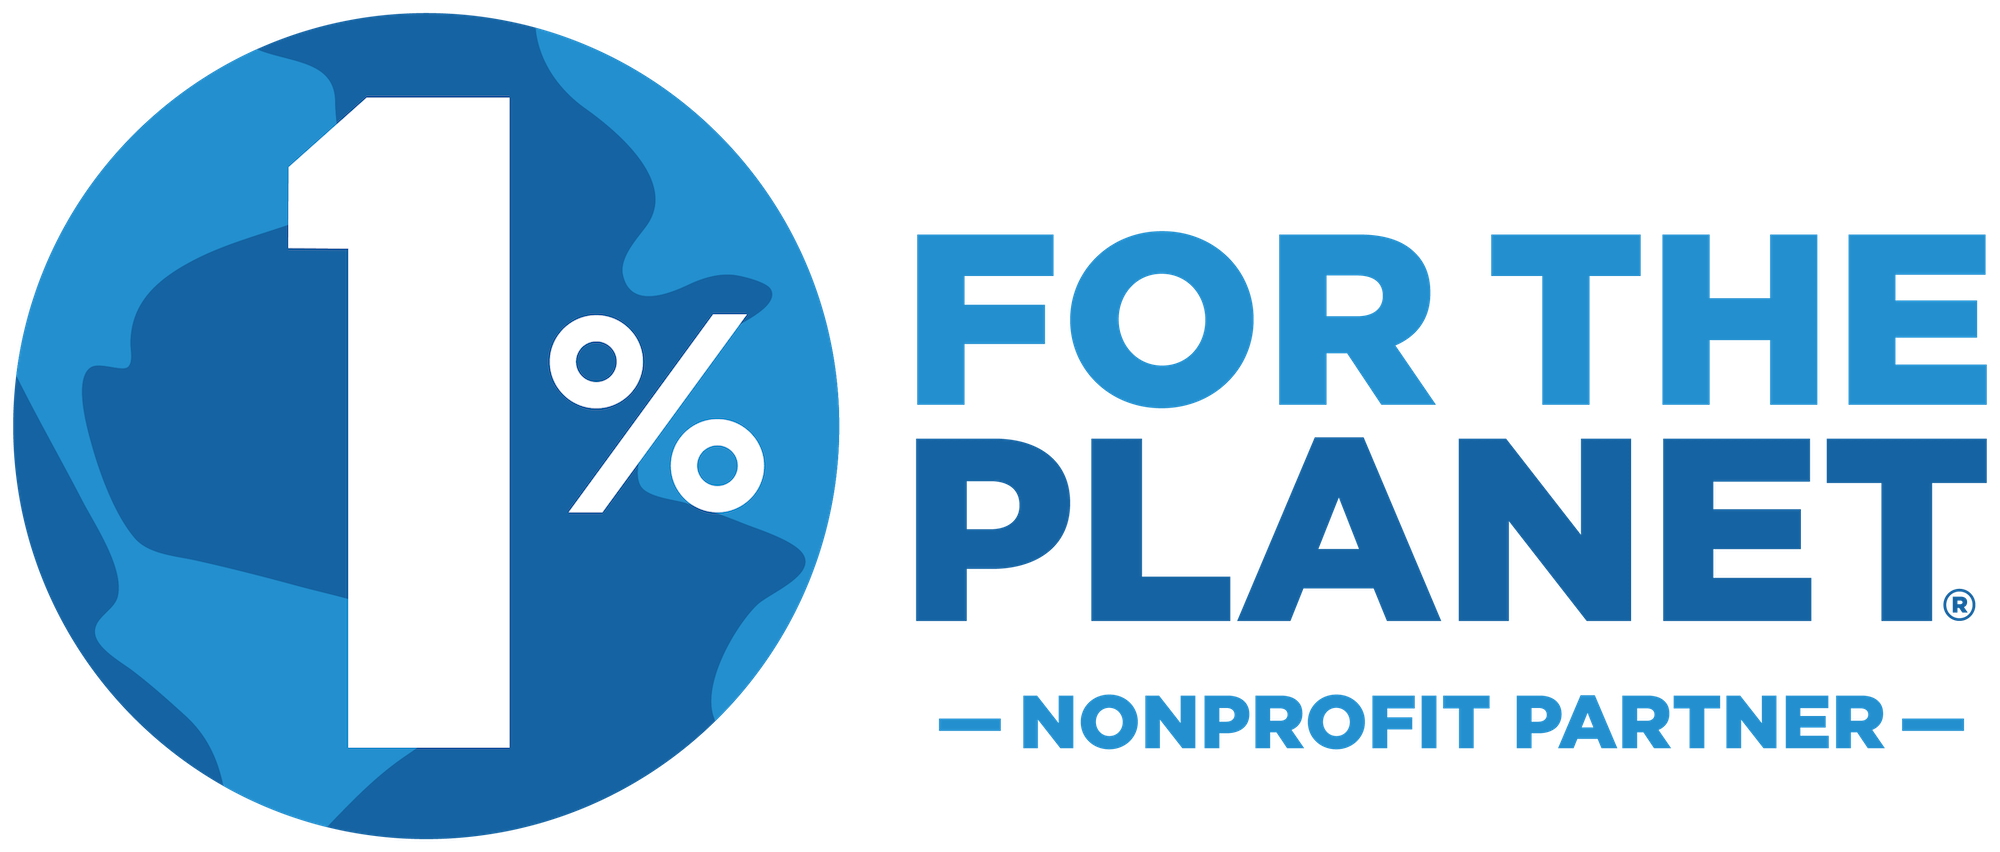 1 percent for the planet logo